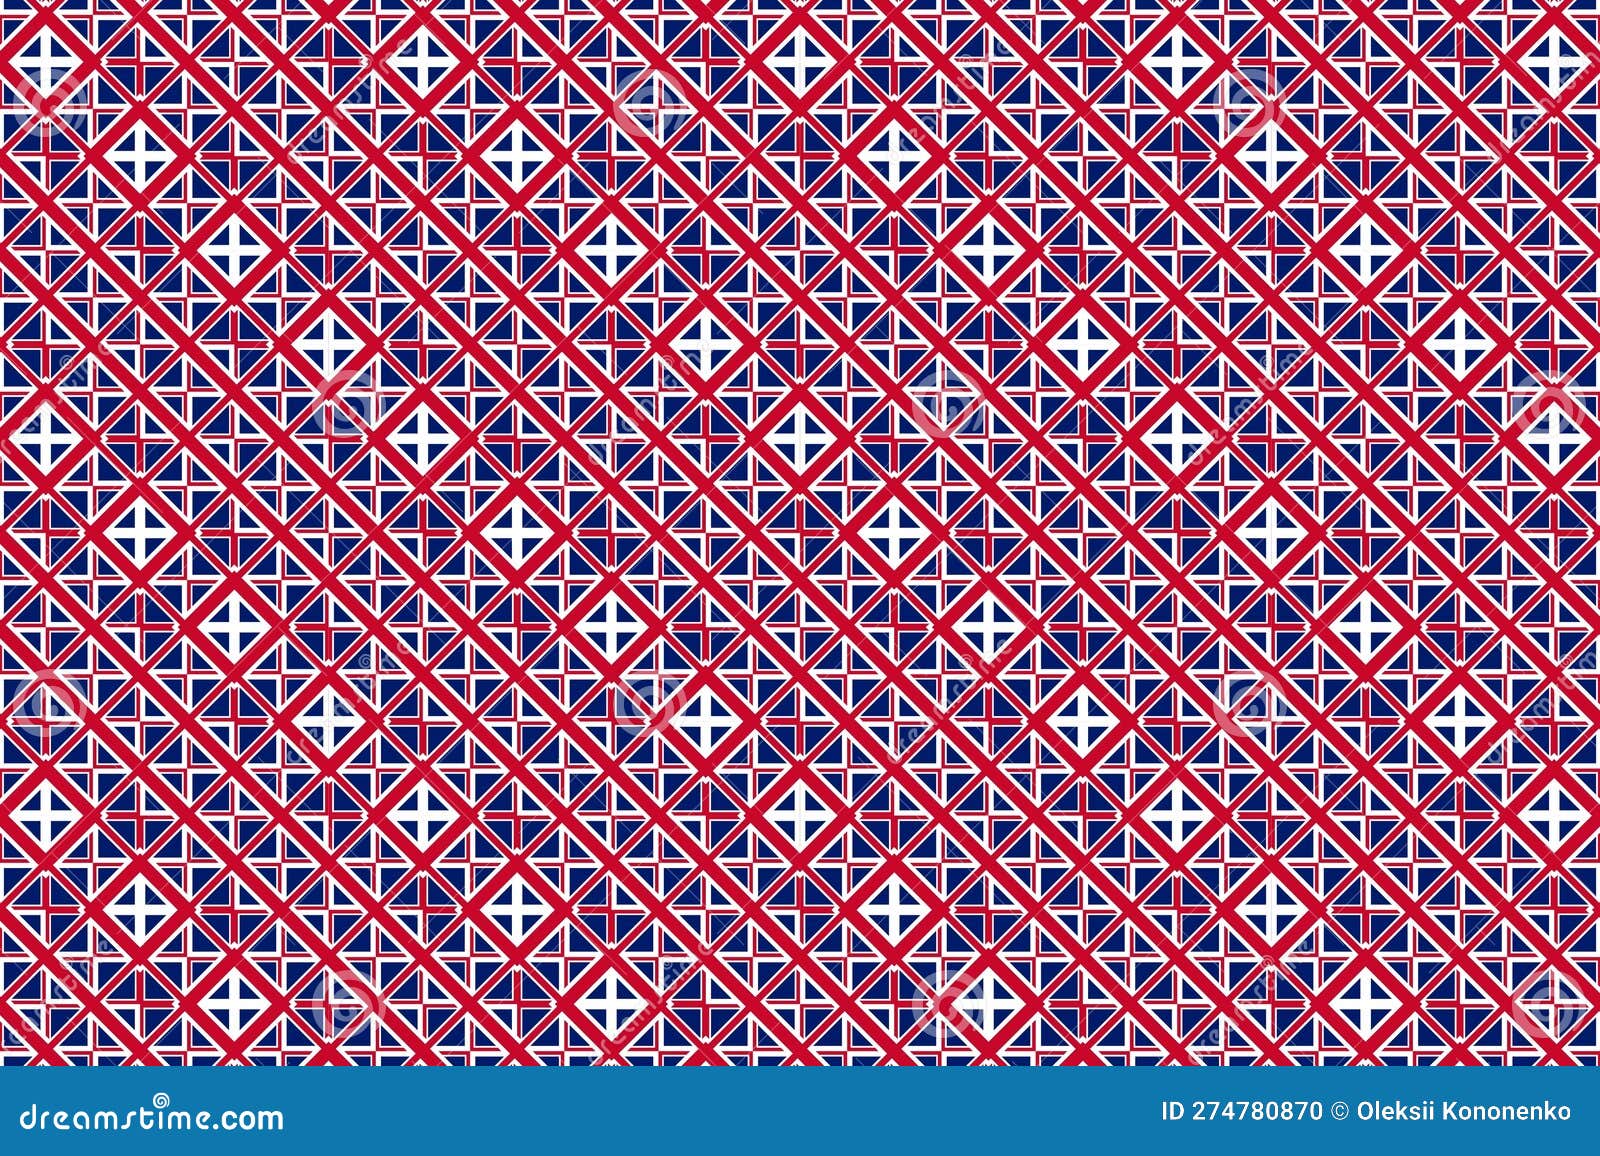 Geometric Pattern in the Colors of the National Flag of United Kingdom ...